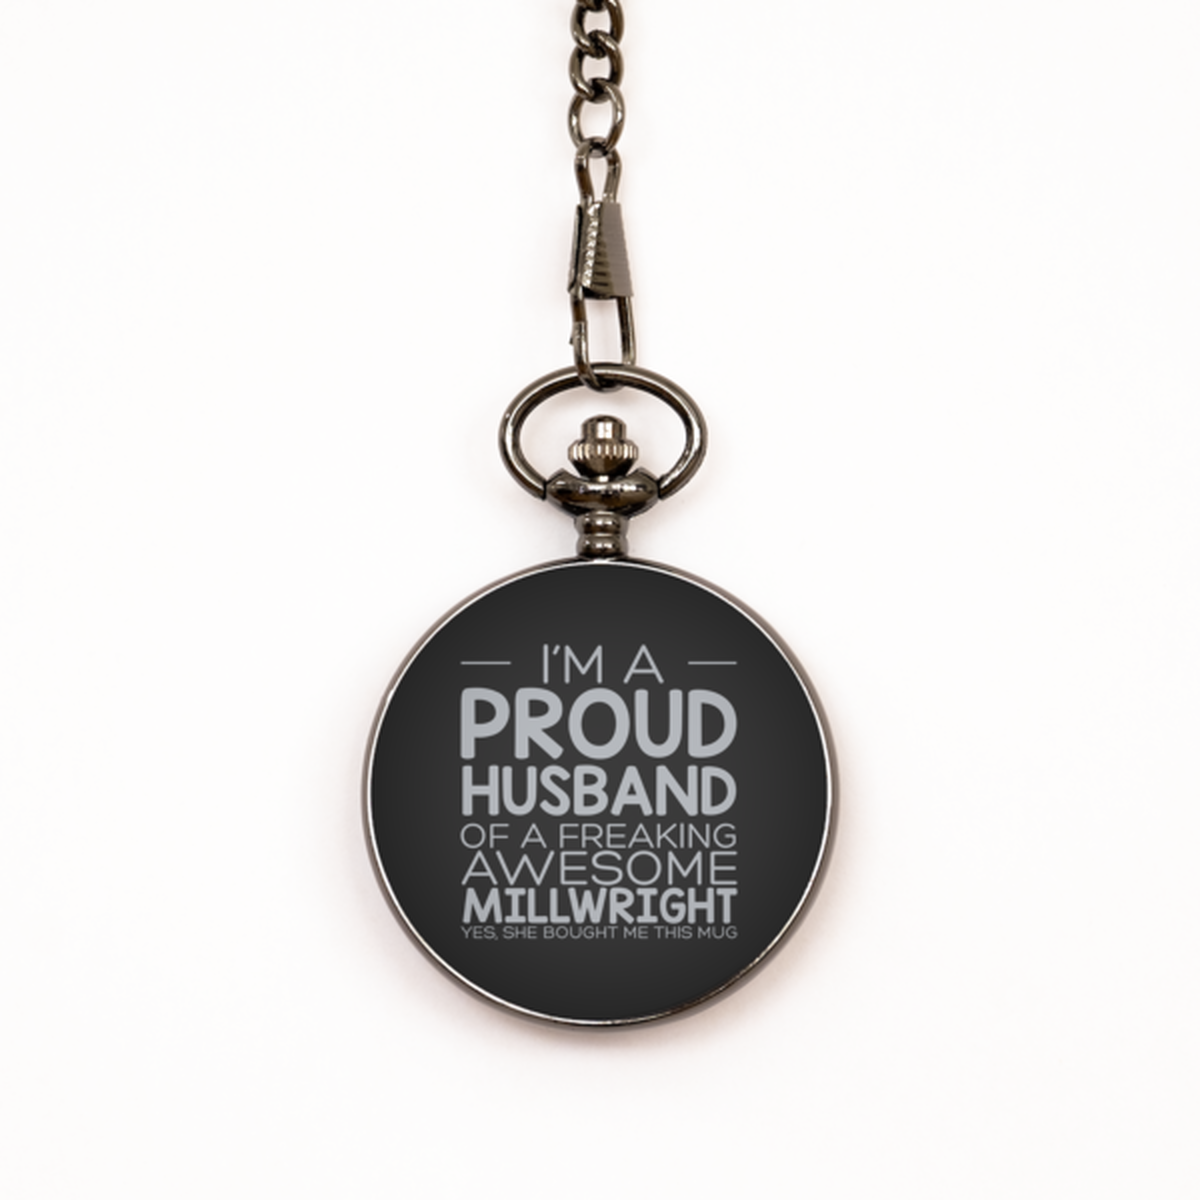 Millwright Husband Pocket Watch, Gifts for Husband From Wife, Engraved Pocket Watch